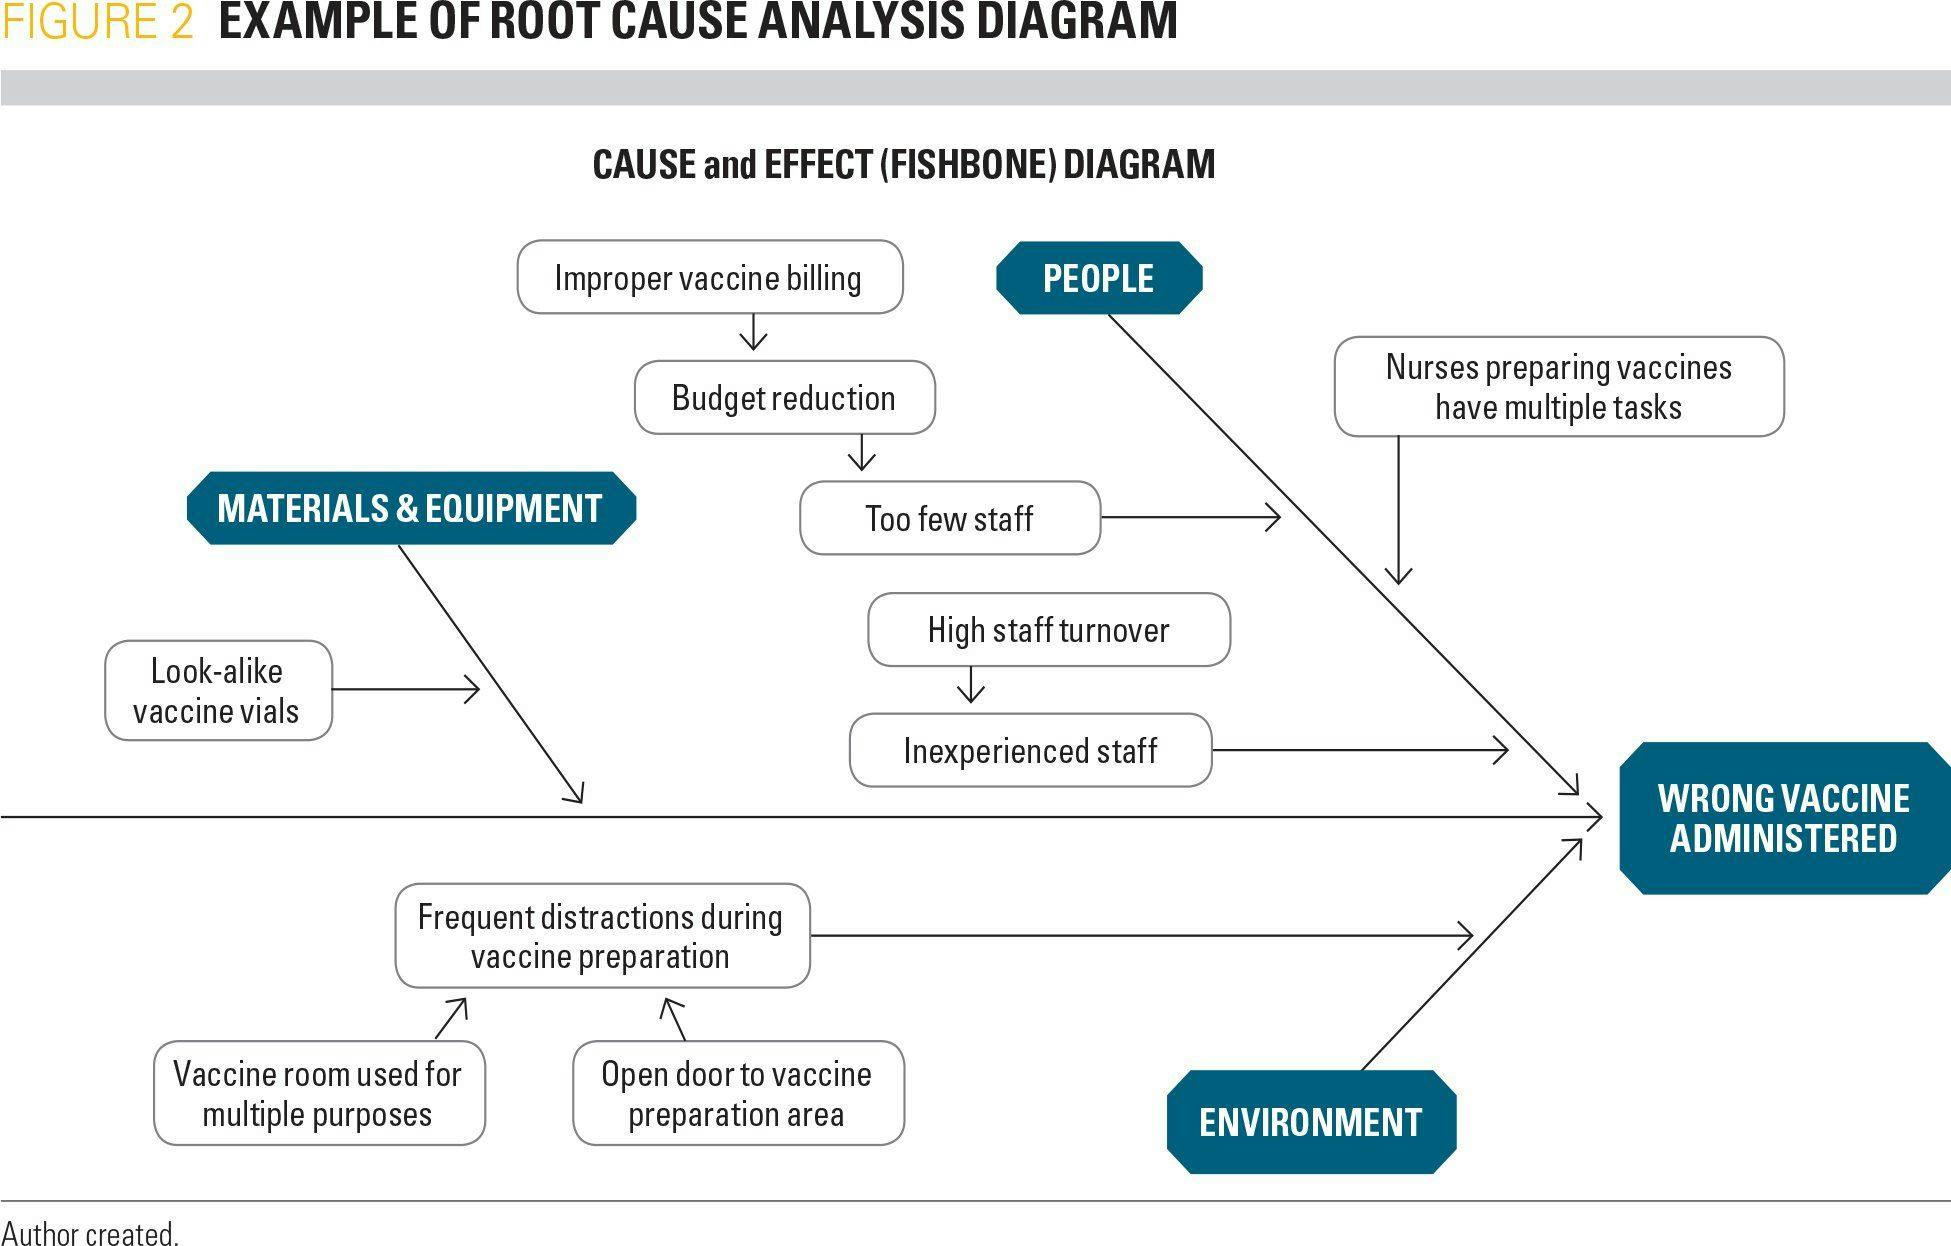 Example of root cause analysis diagram